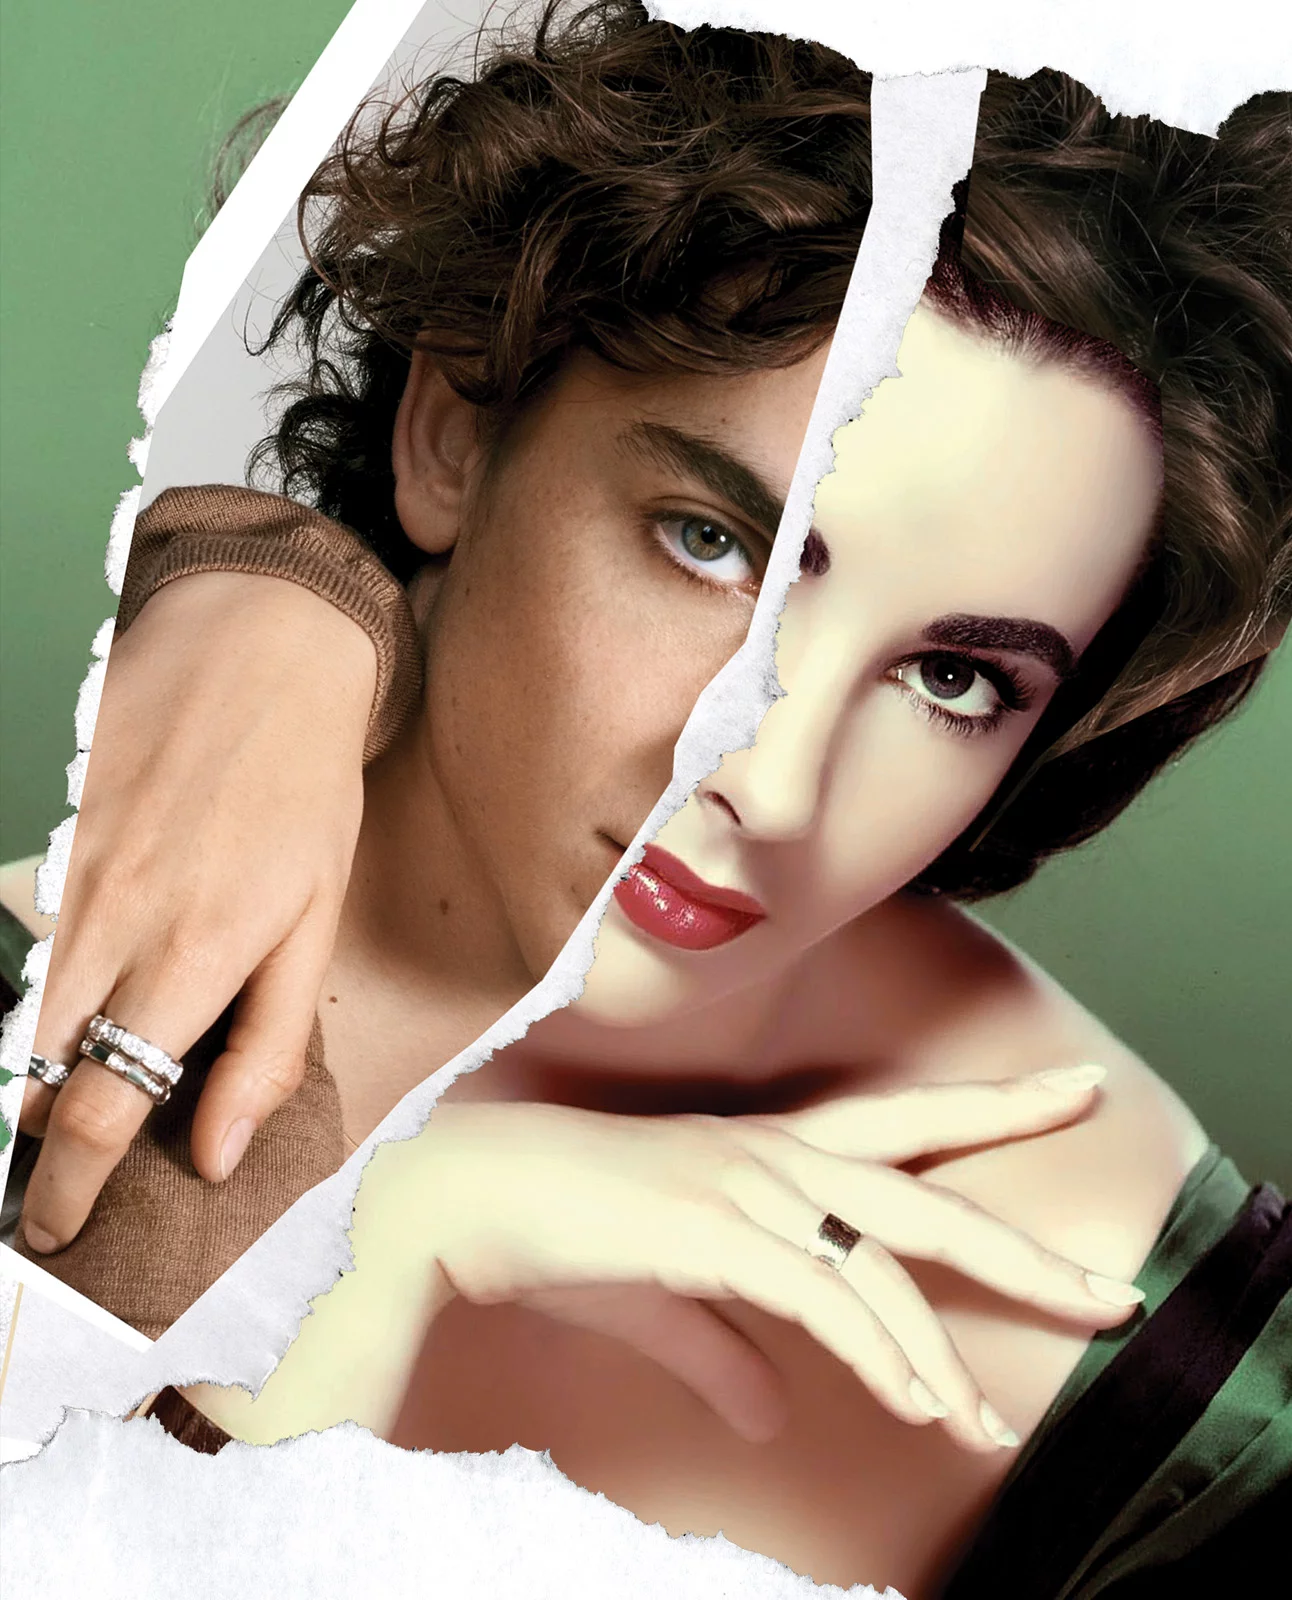 Rework x Timothee Chalamet mixed with Elizabeth Taylor. by Portis WASP